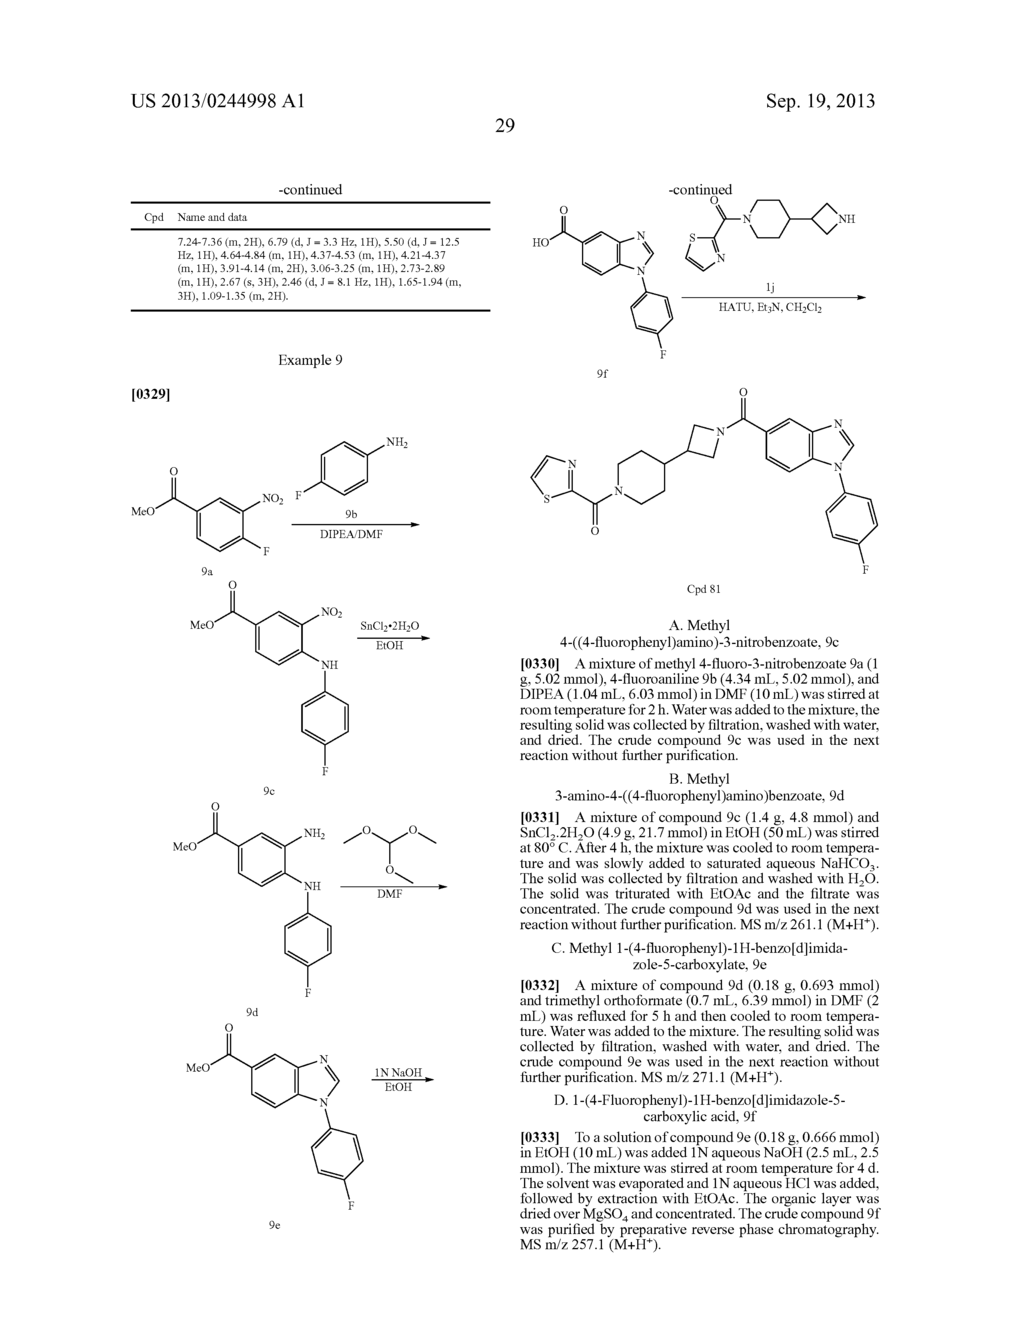 PIPERIDIN-4-YL-AZETIDINE DIAMIDES AS MONOACYLGLCEROL LIPASE INHIBITORS - diagram, schematic, and image 30